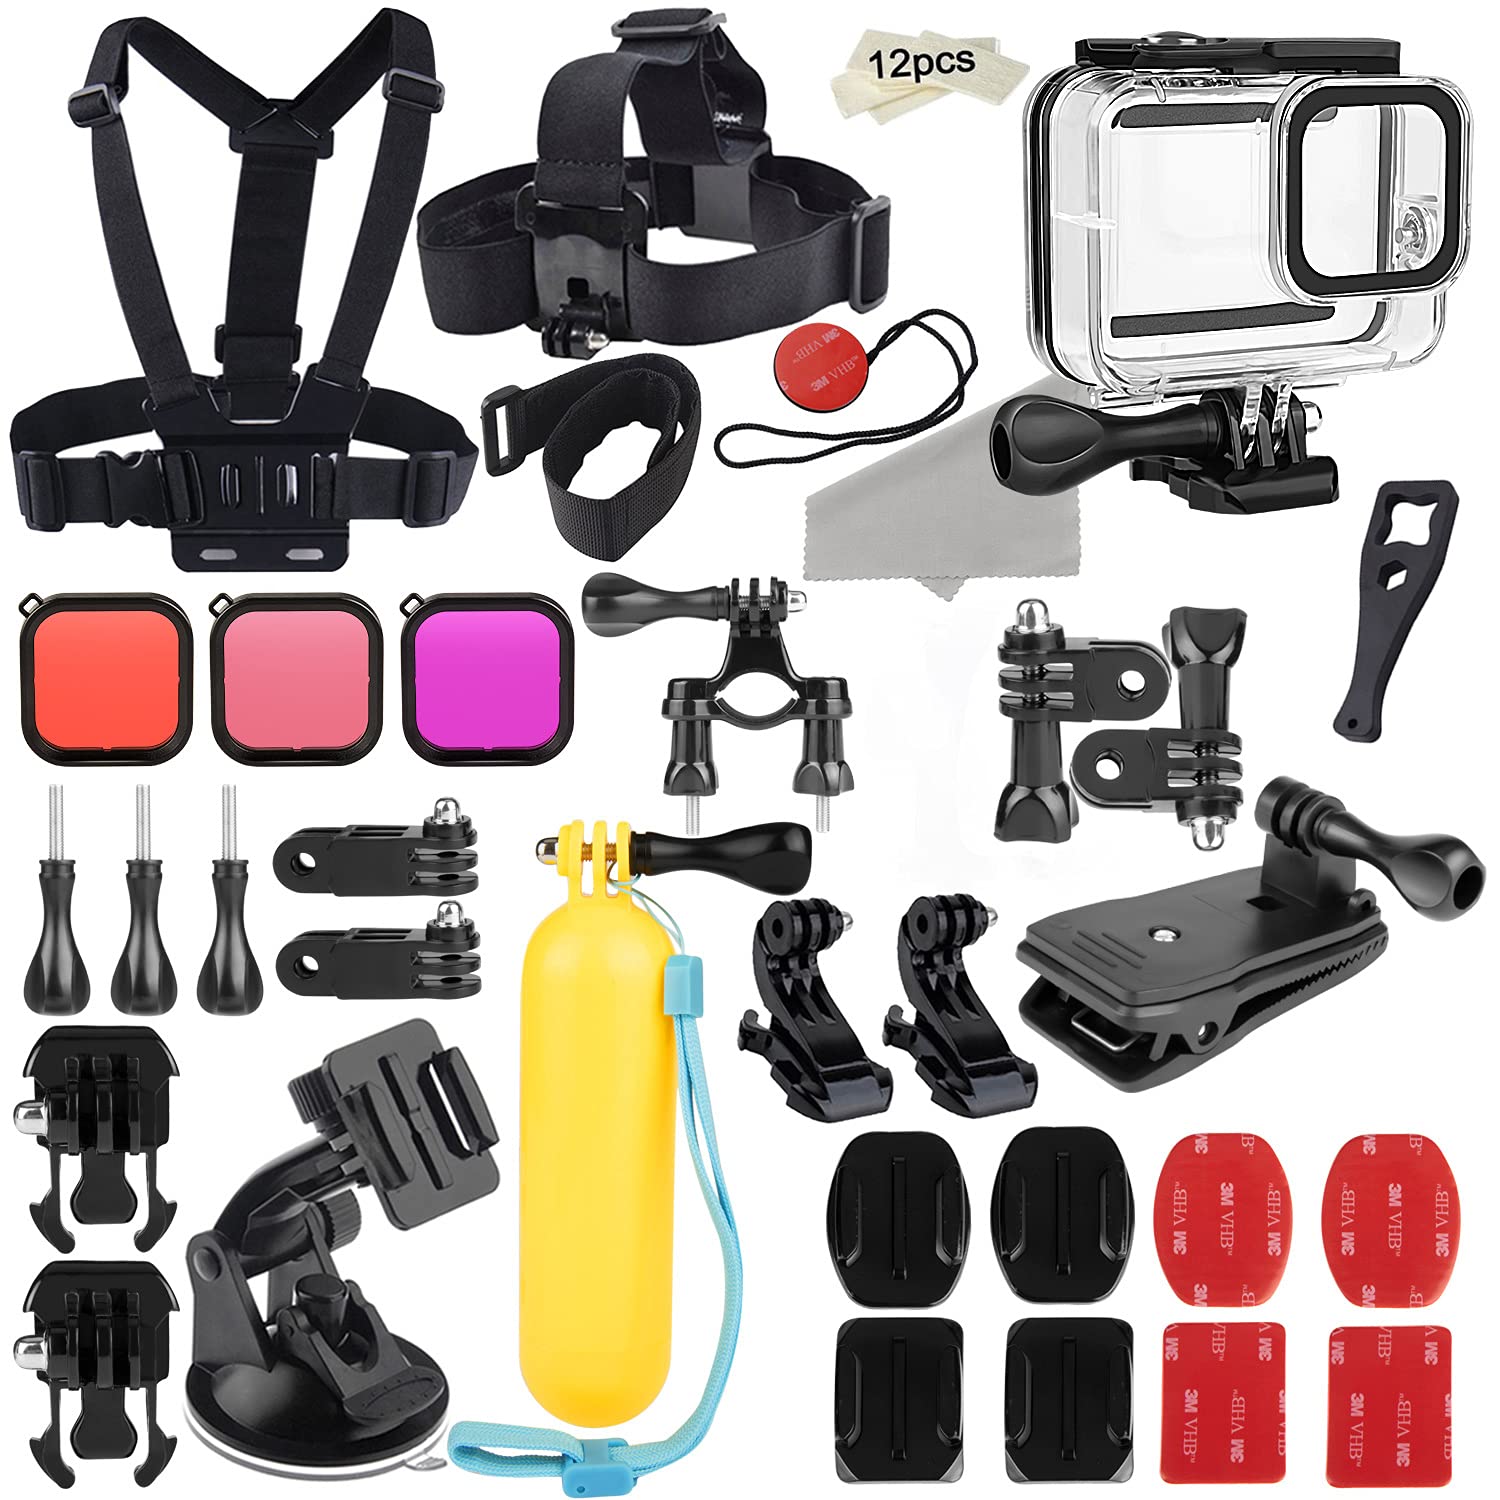 52-in-1 Accessories Kit Compatible with GoPro Hero 8 Black